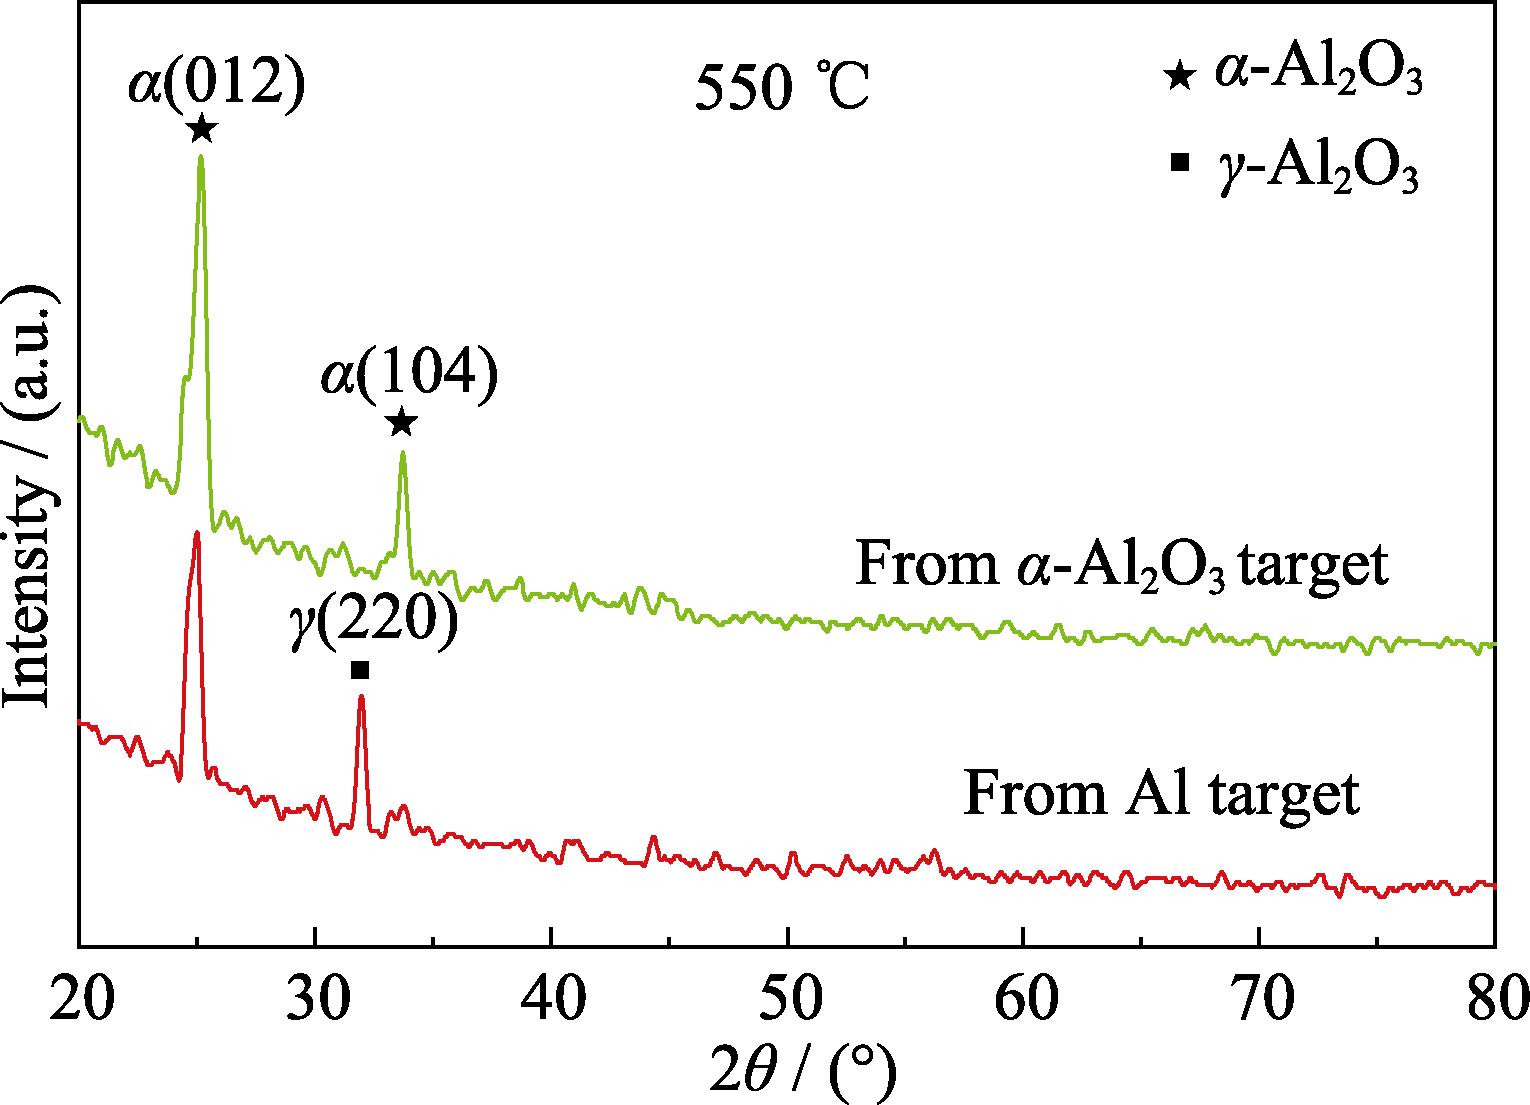 GIXRD patterns of the films deposited at 550 ℃ from Al target and α-Al2O3 target